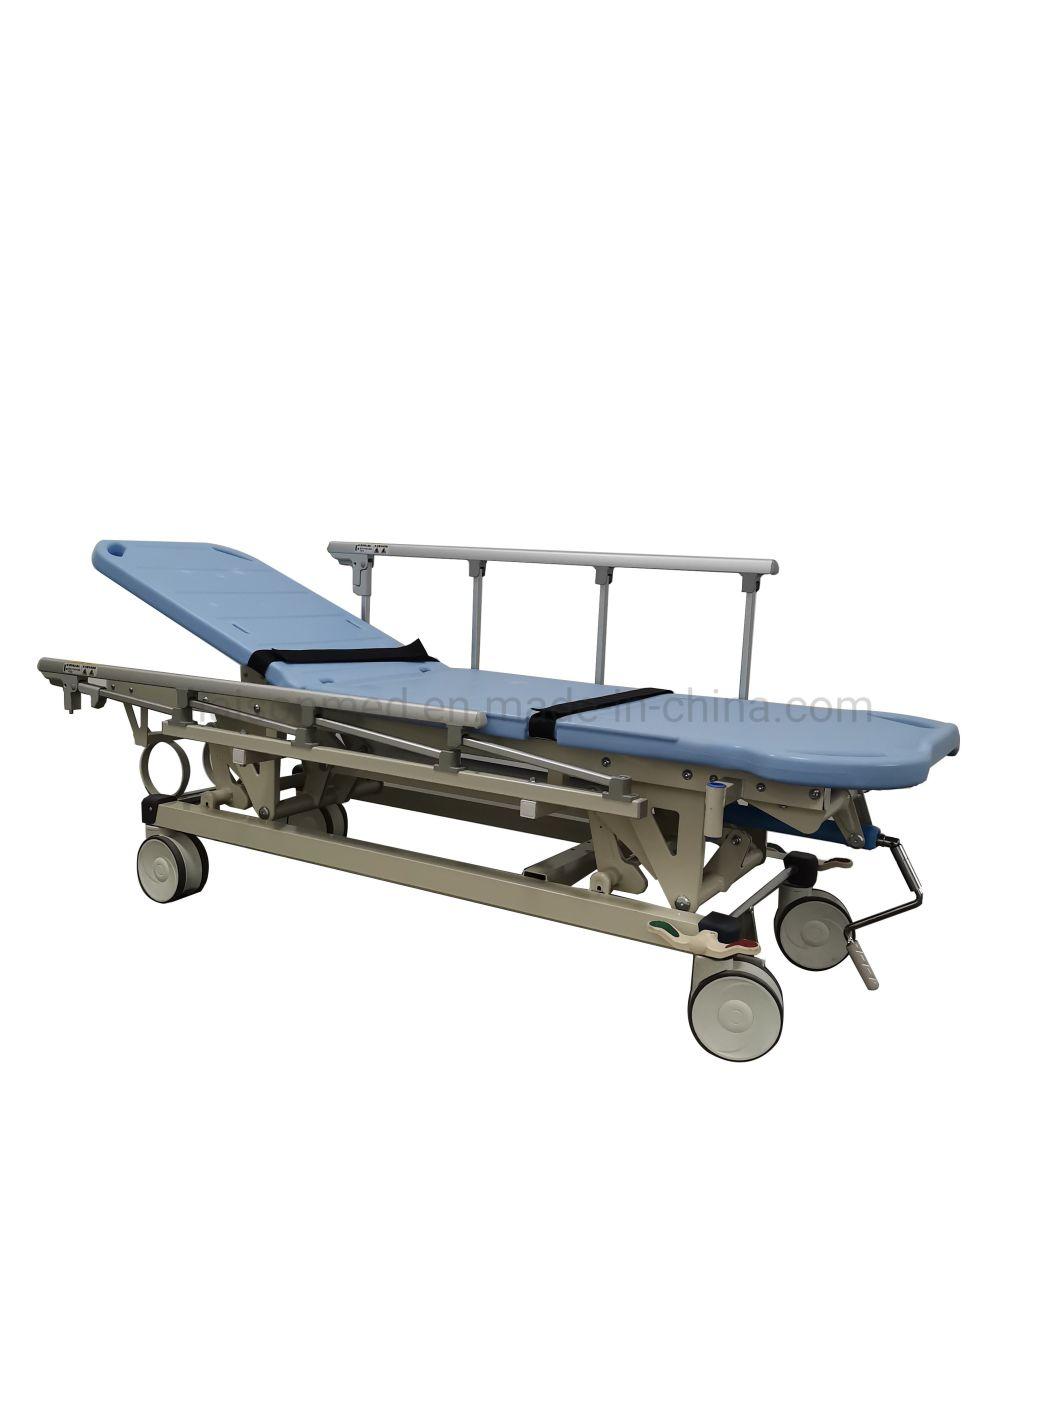 Metal Blue Liaison Wooden Package 1930mm*663mm*510— 850mm Stretcher Medical Bed